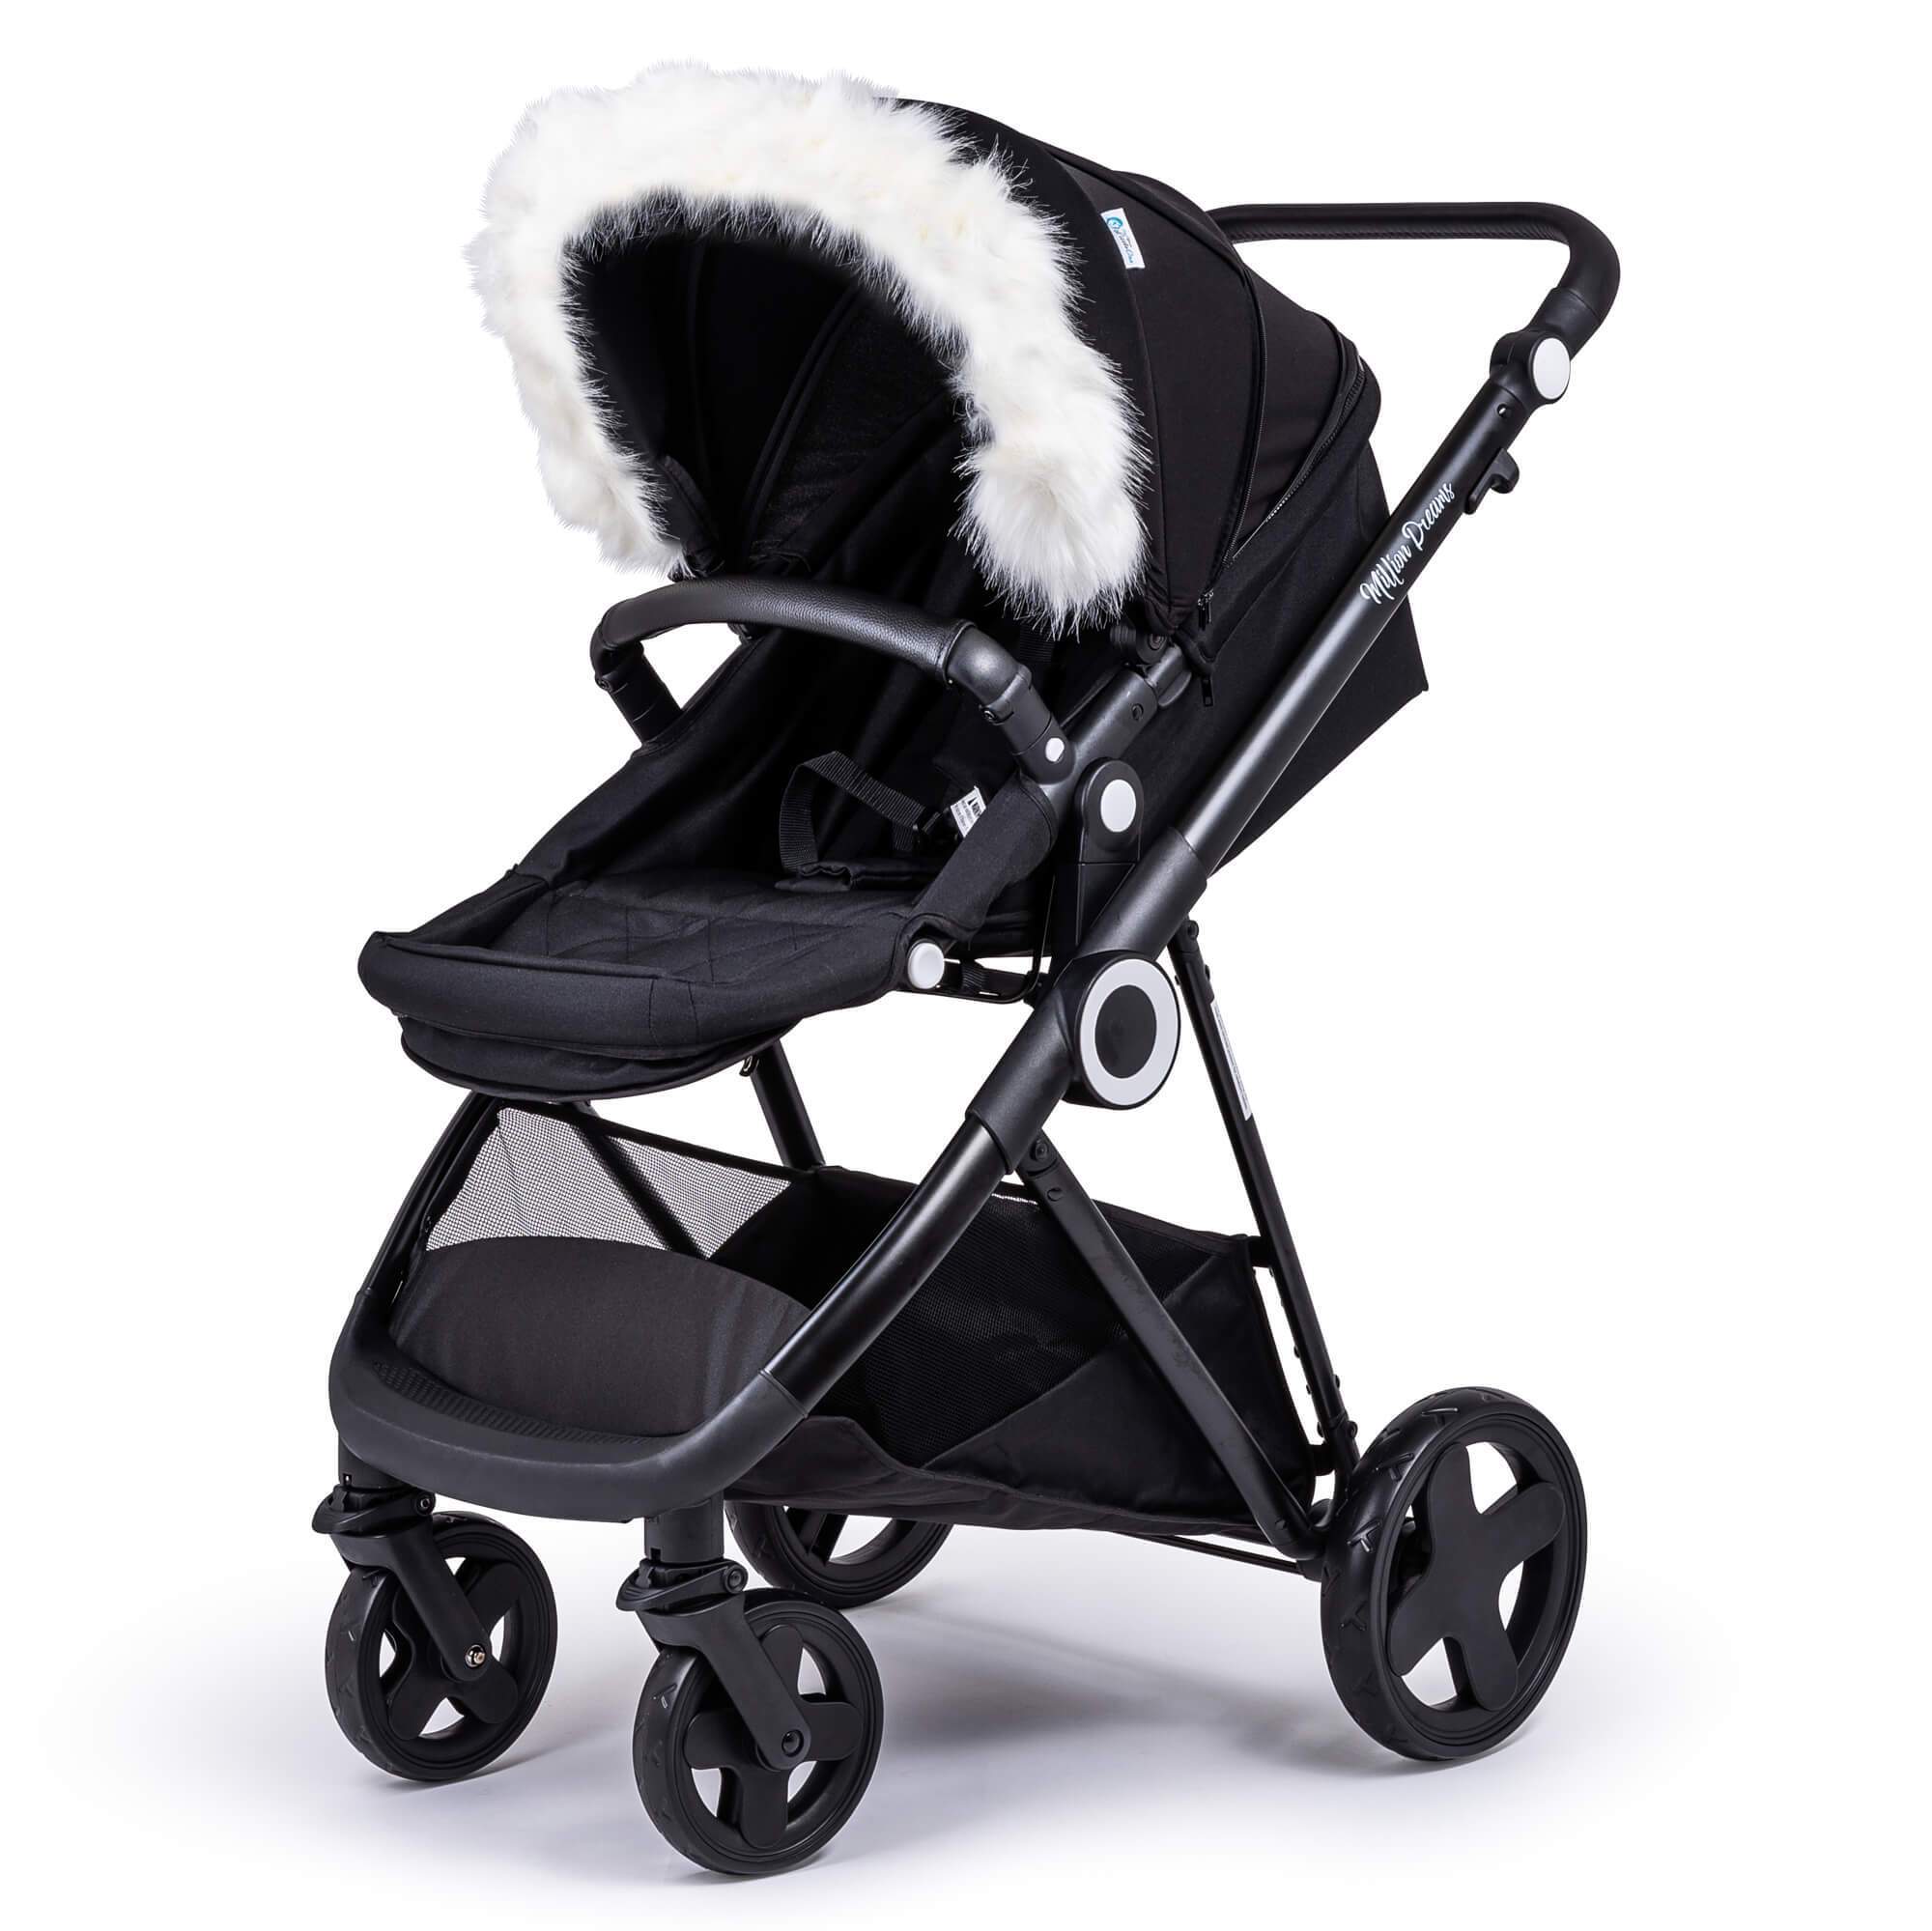 Pram Fur Hood Trim Attachment for Pushchair Compatible with Bebecar - For Your Little One